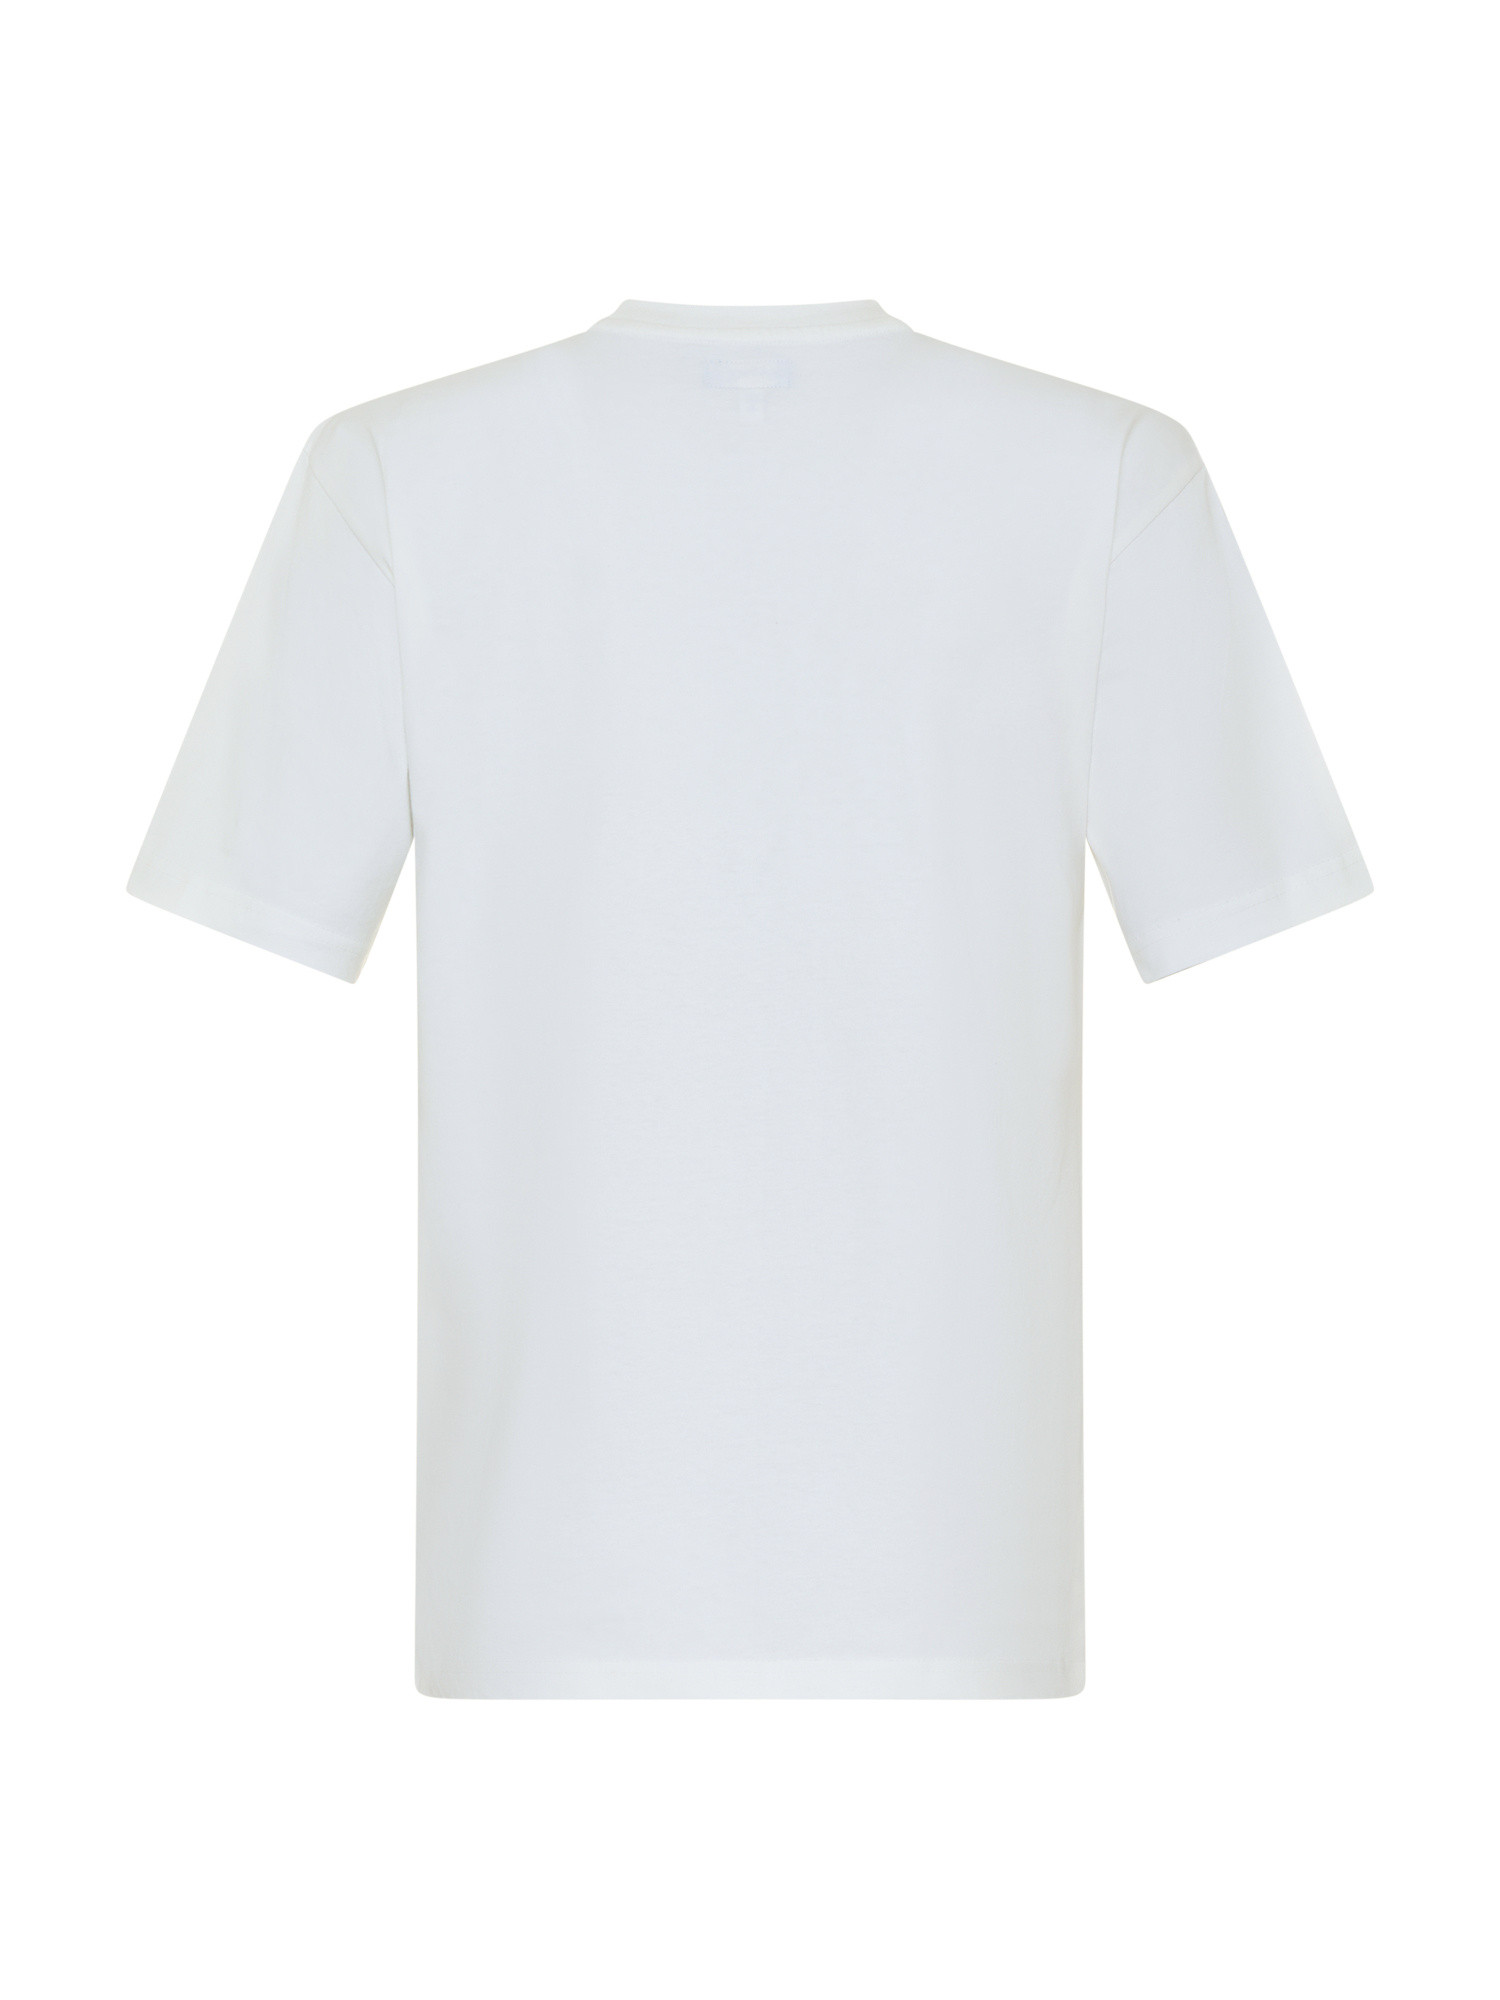 Market - Cotton T-shirt with print, White, large image number 1